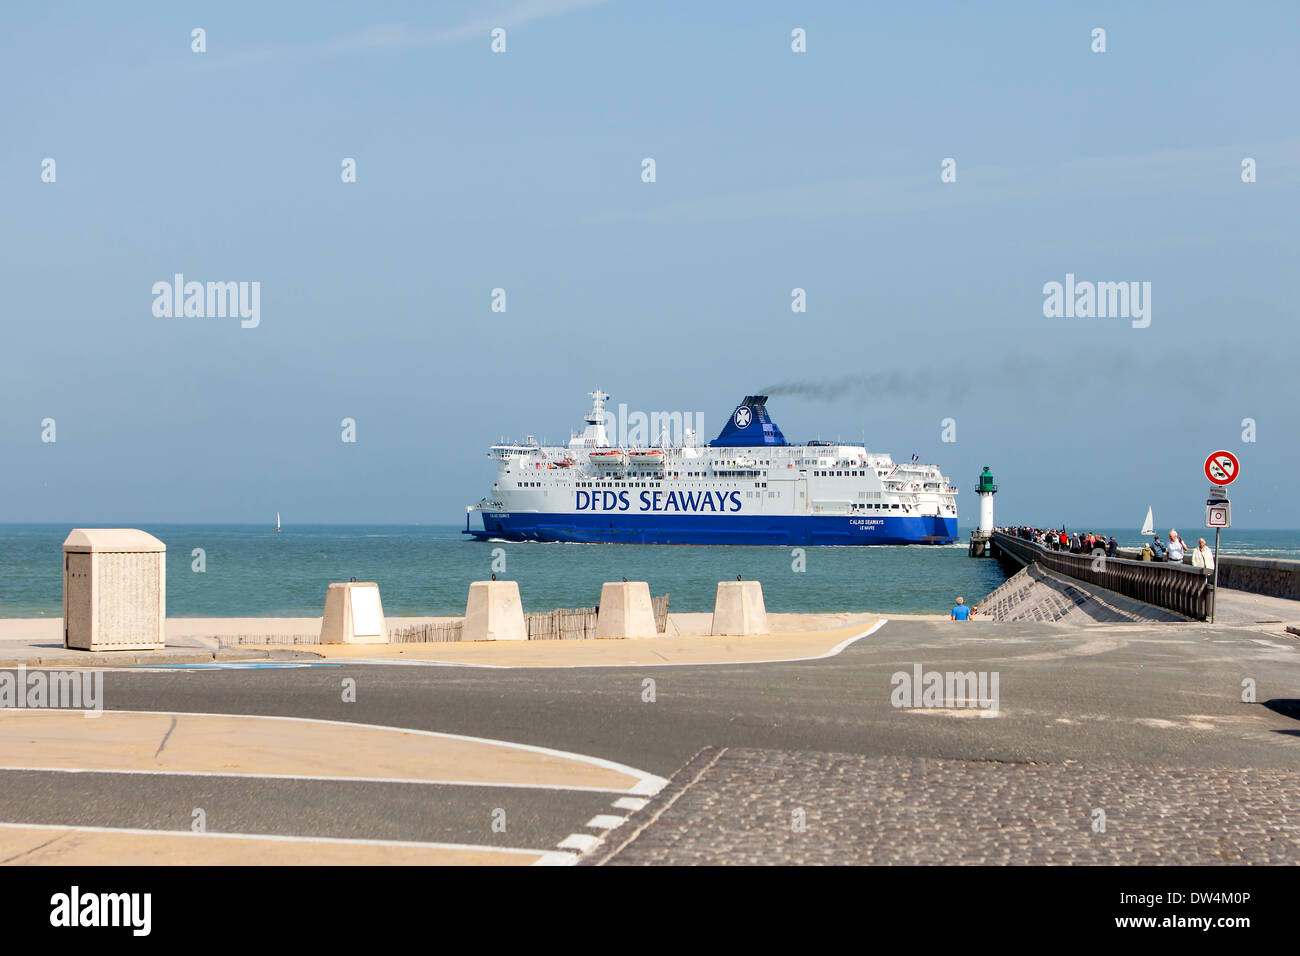 Ferry departing the harbour of Calais, France. It is a sunny morning and a lot of people on the pier. Stock Photo